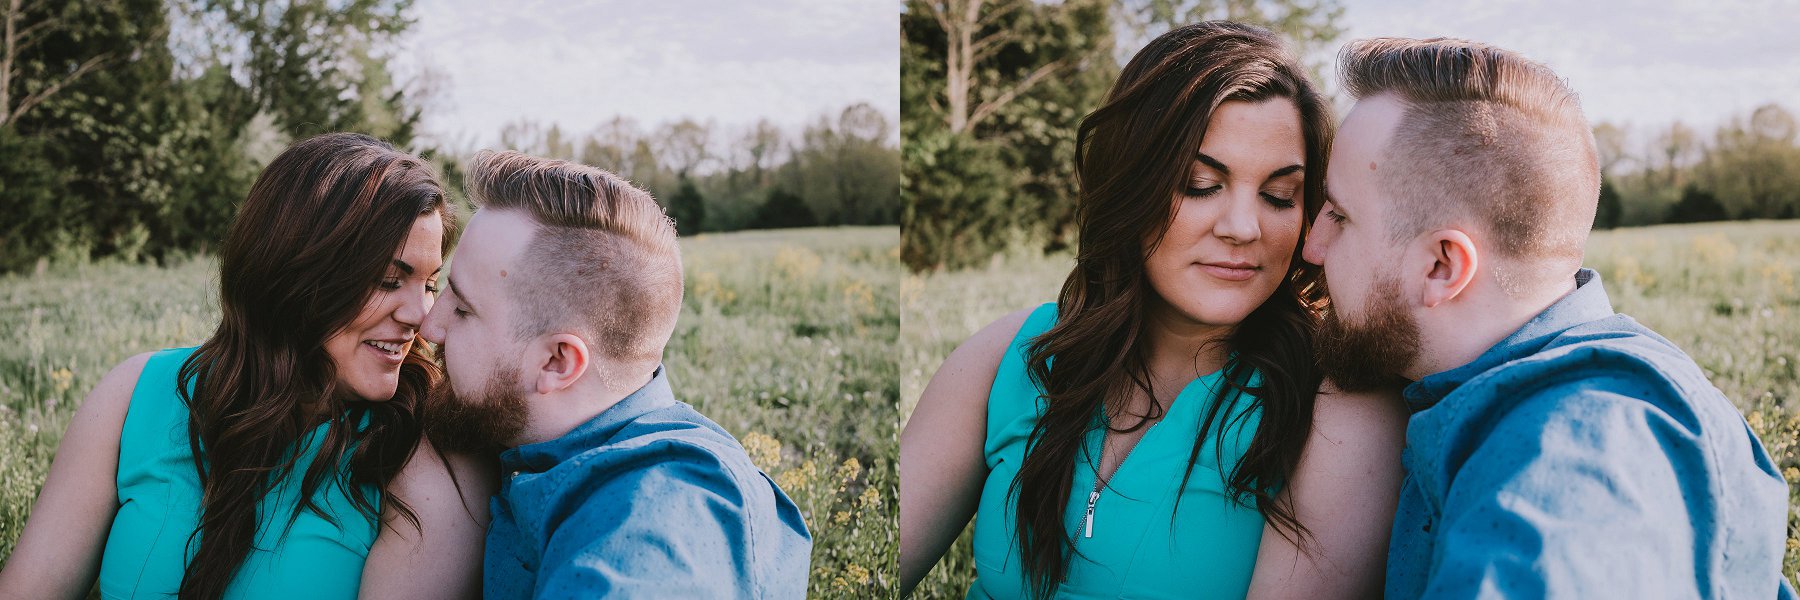 Spring Engagement Photography in Kansas City by Merry Ohler 5